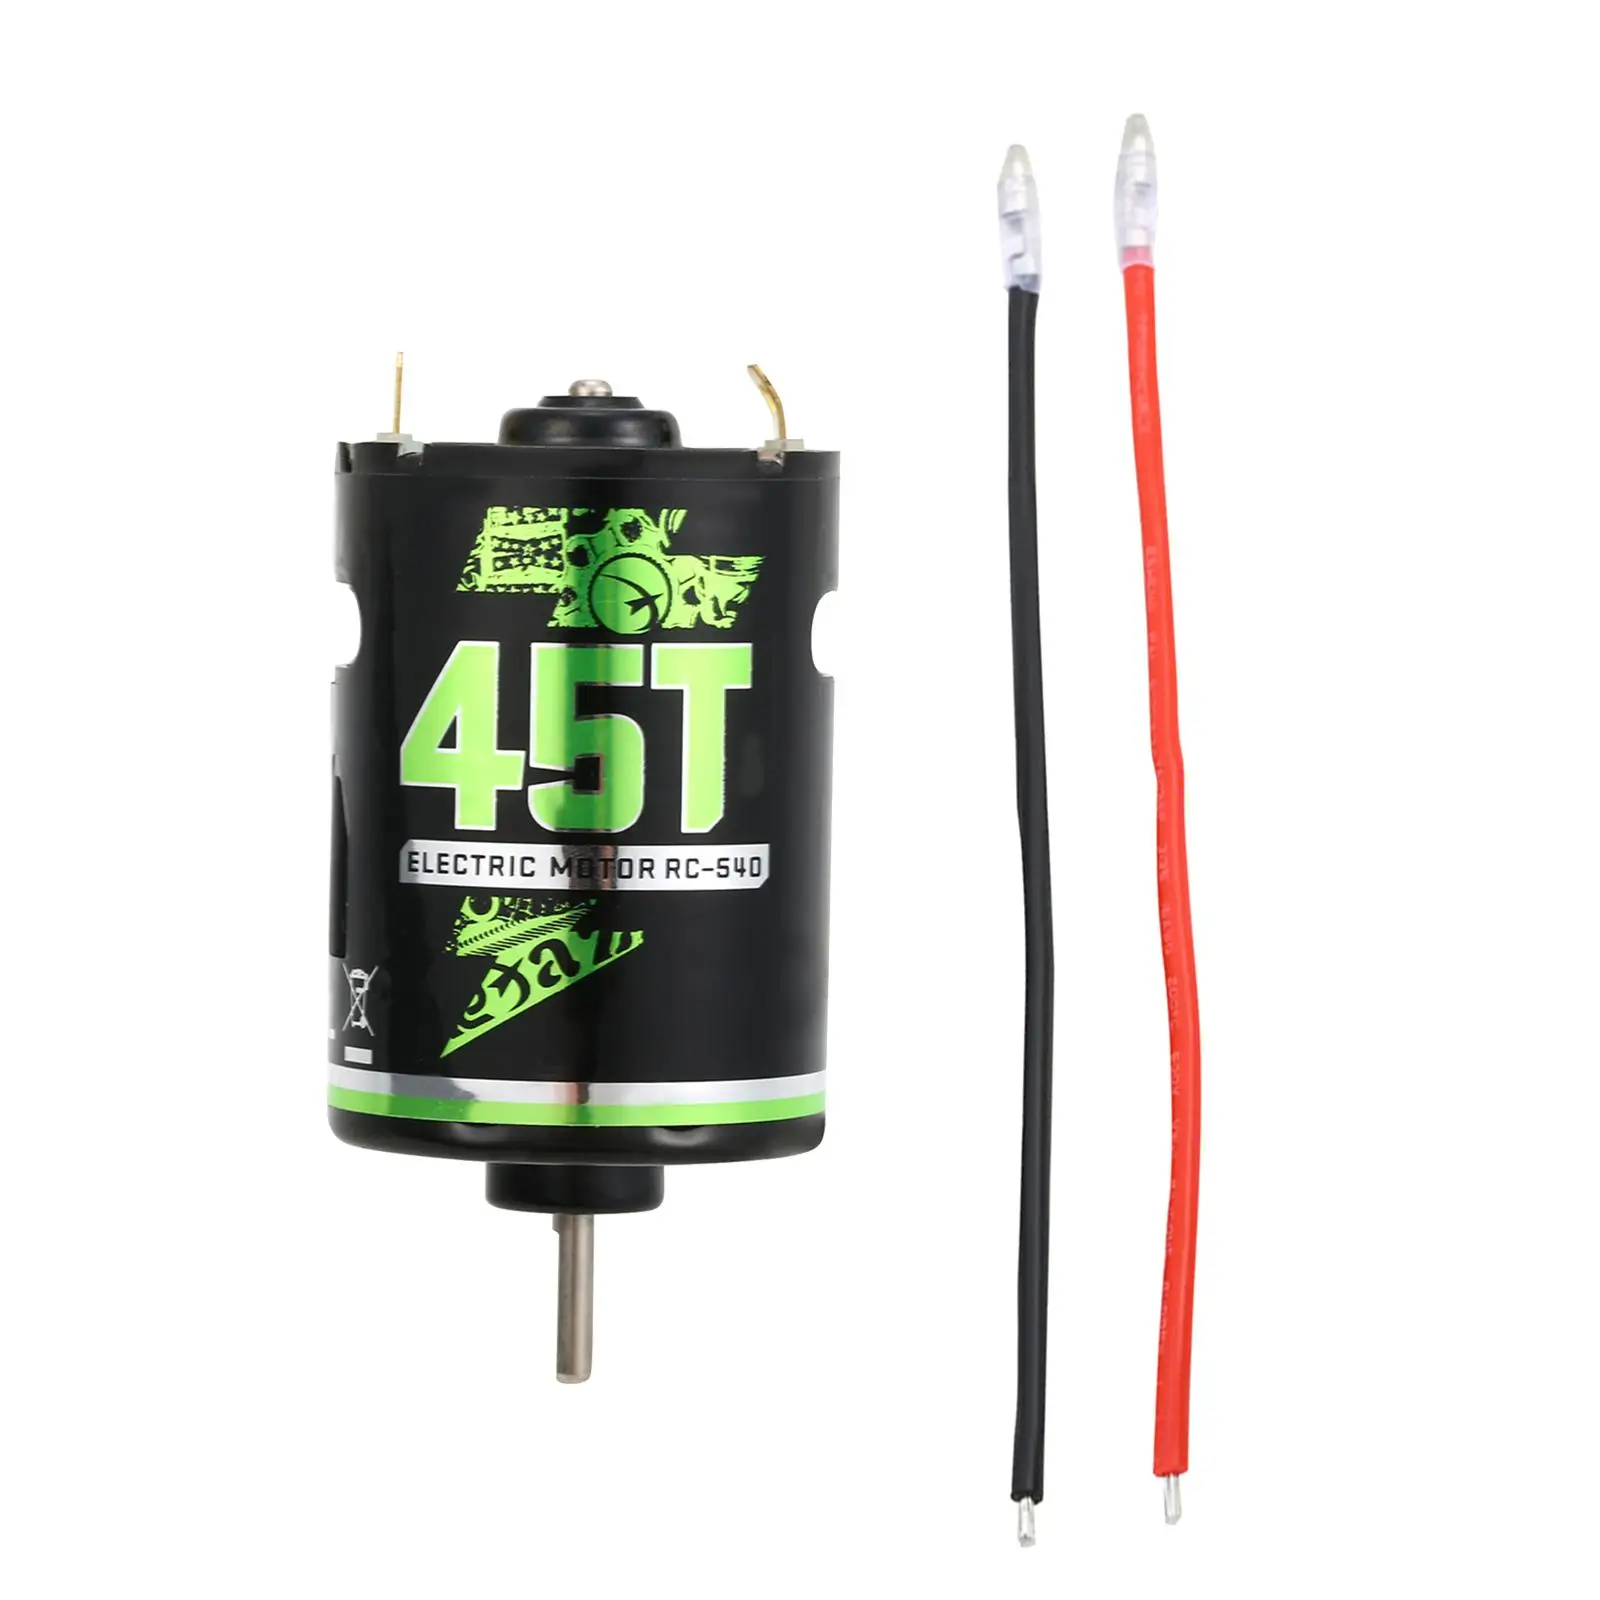 RC 540 Brushed Motor Upgrades High Torque Metal Motor for 1:10 Scale RC Crawler Car Truck Part Replacement Accessories